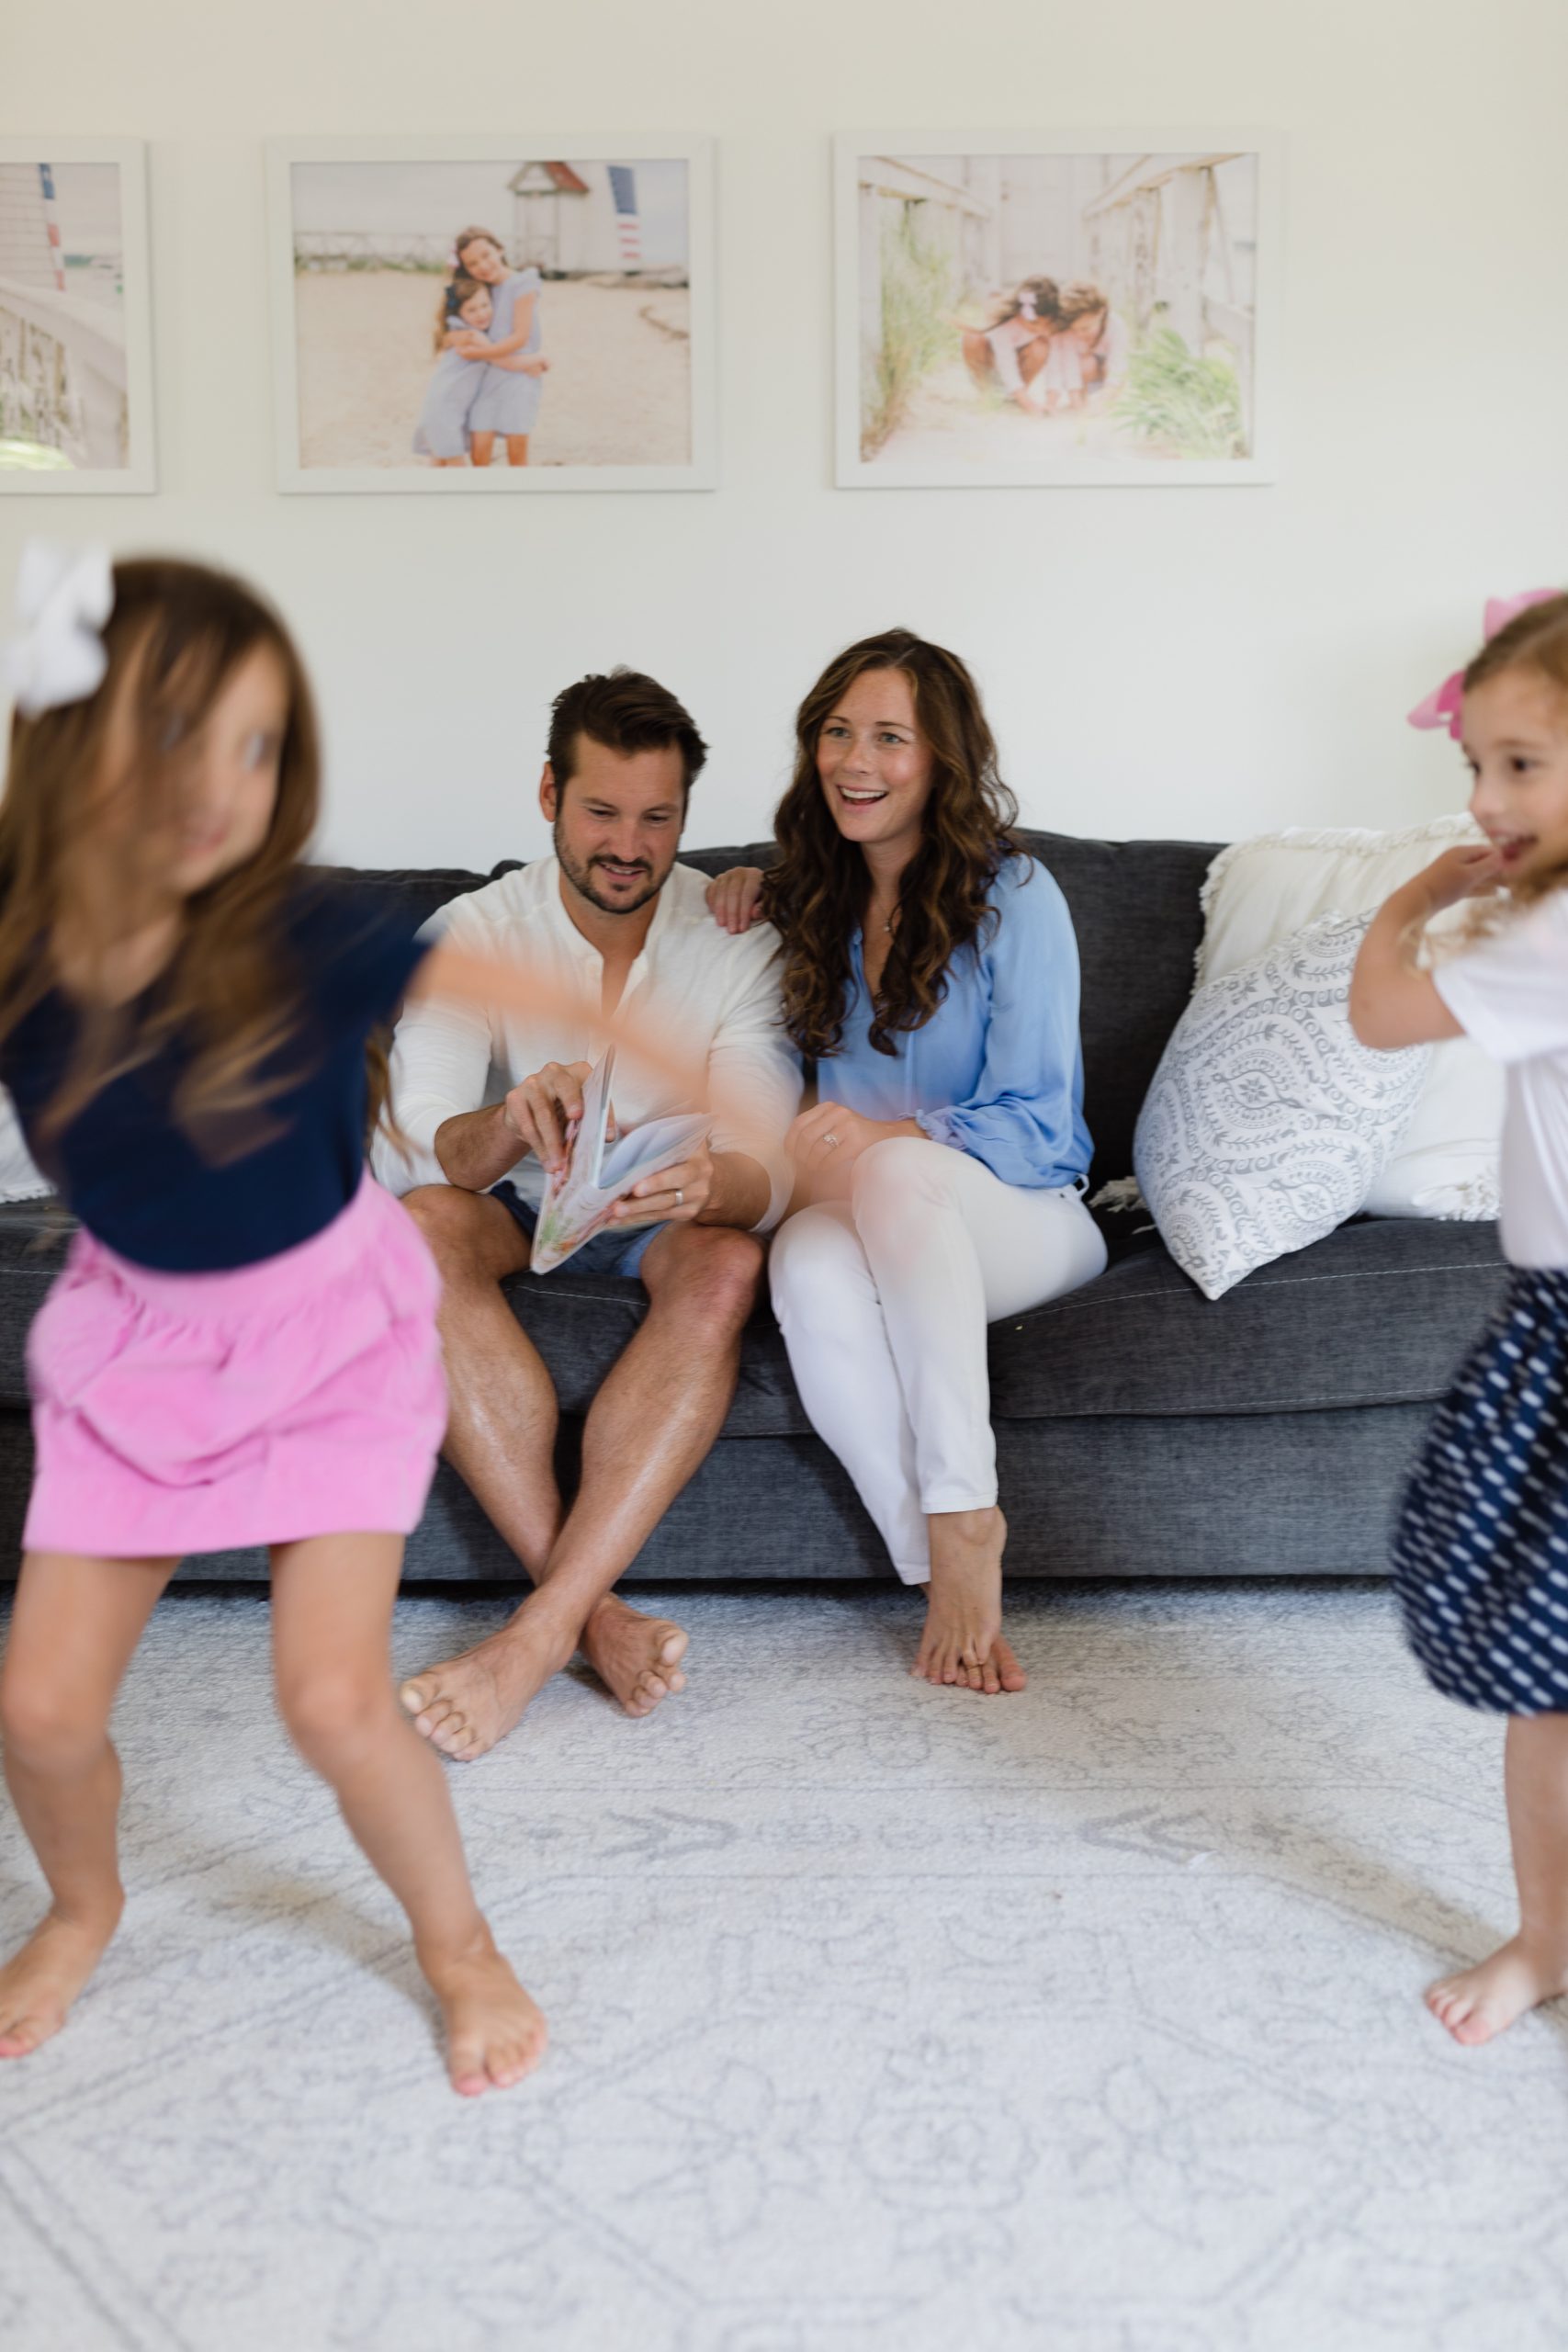 Mom and Dad on couch looking at photo book while girls dance in front of them